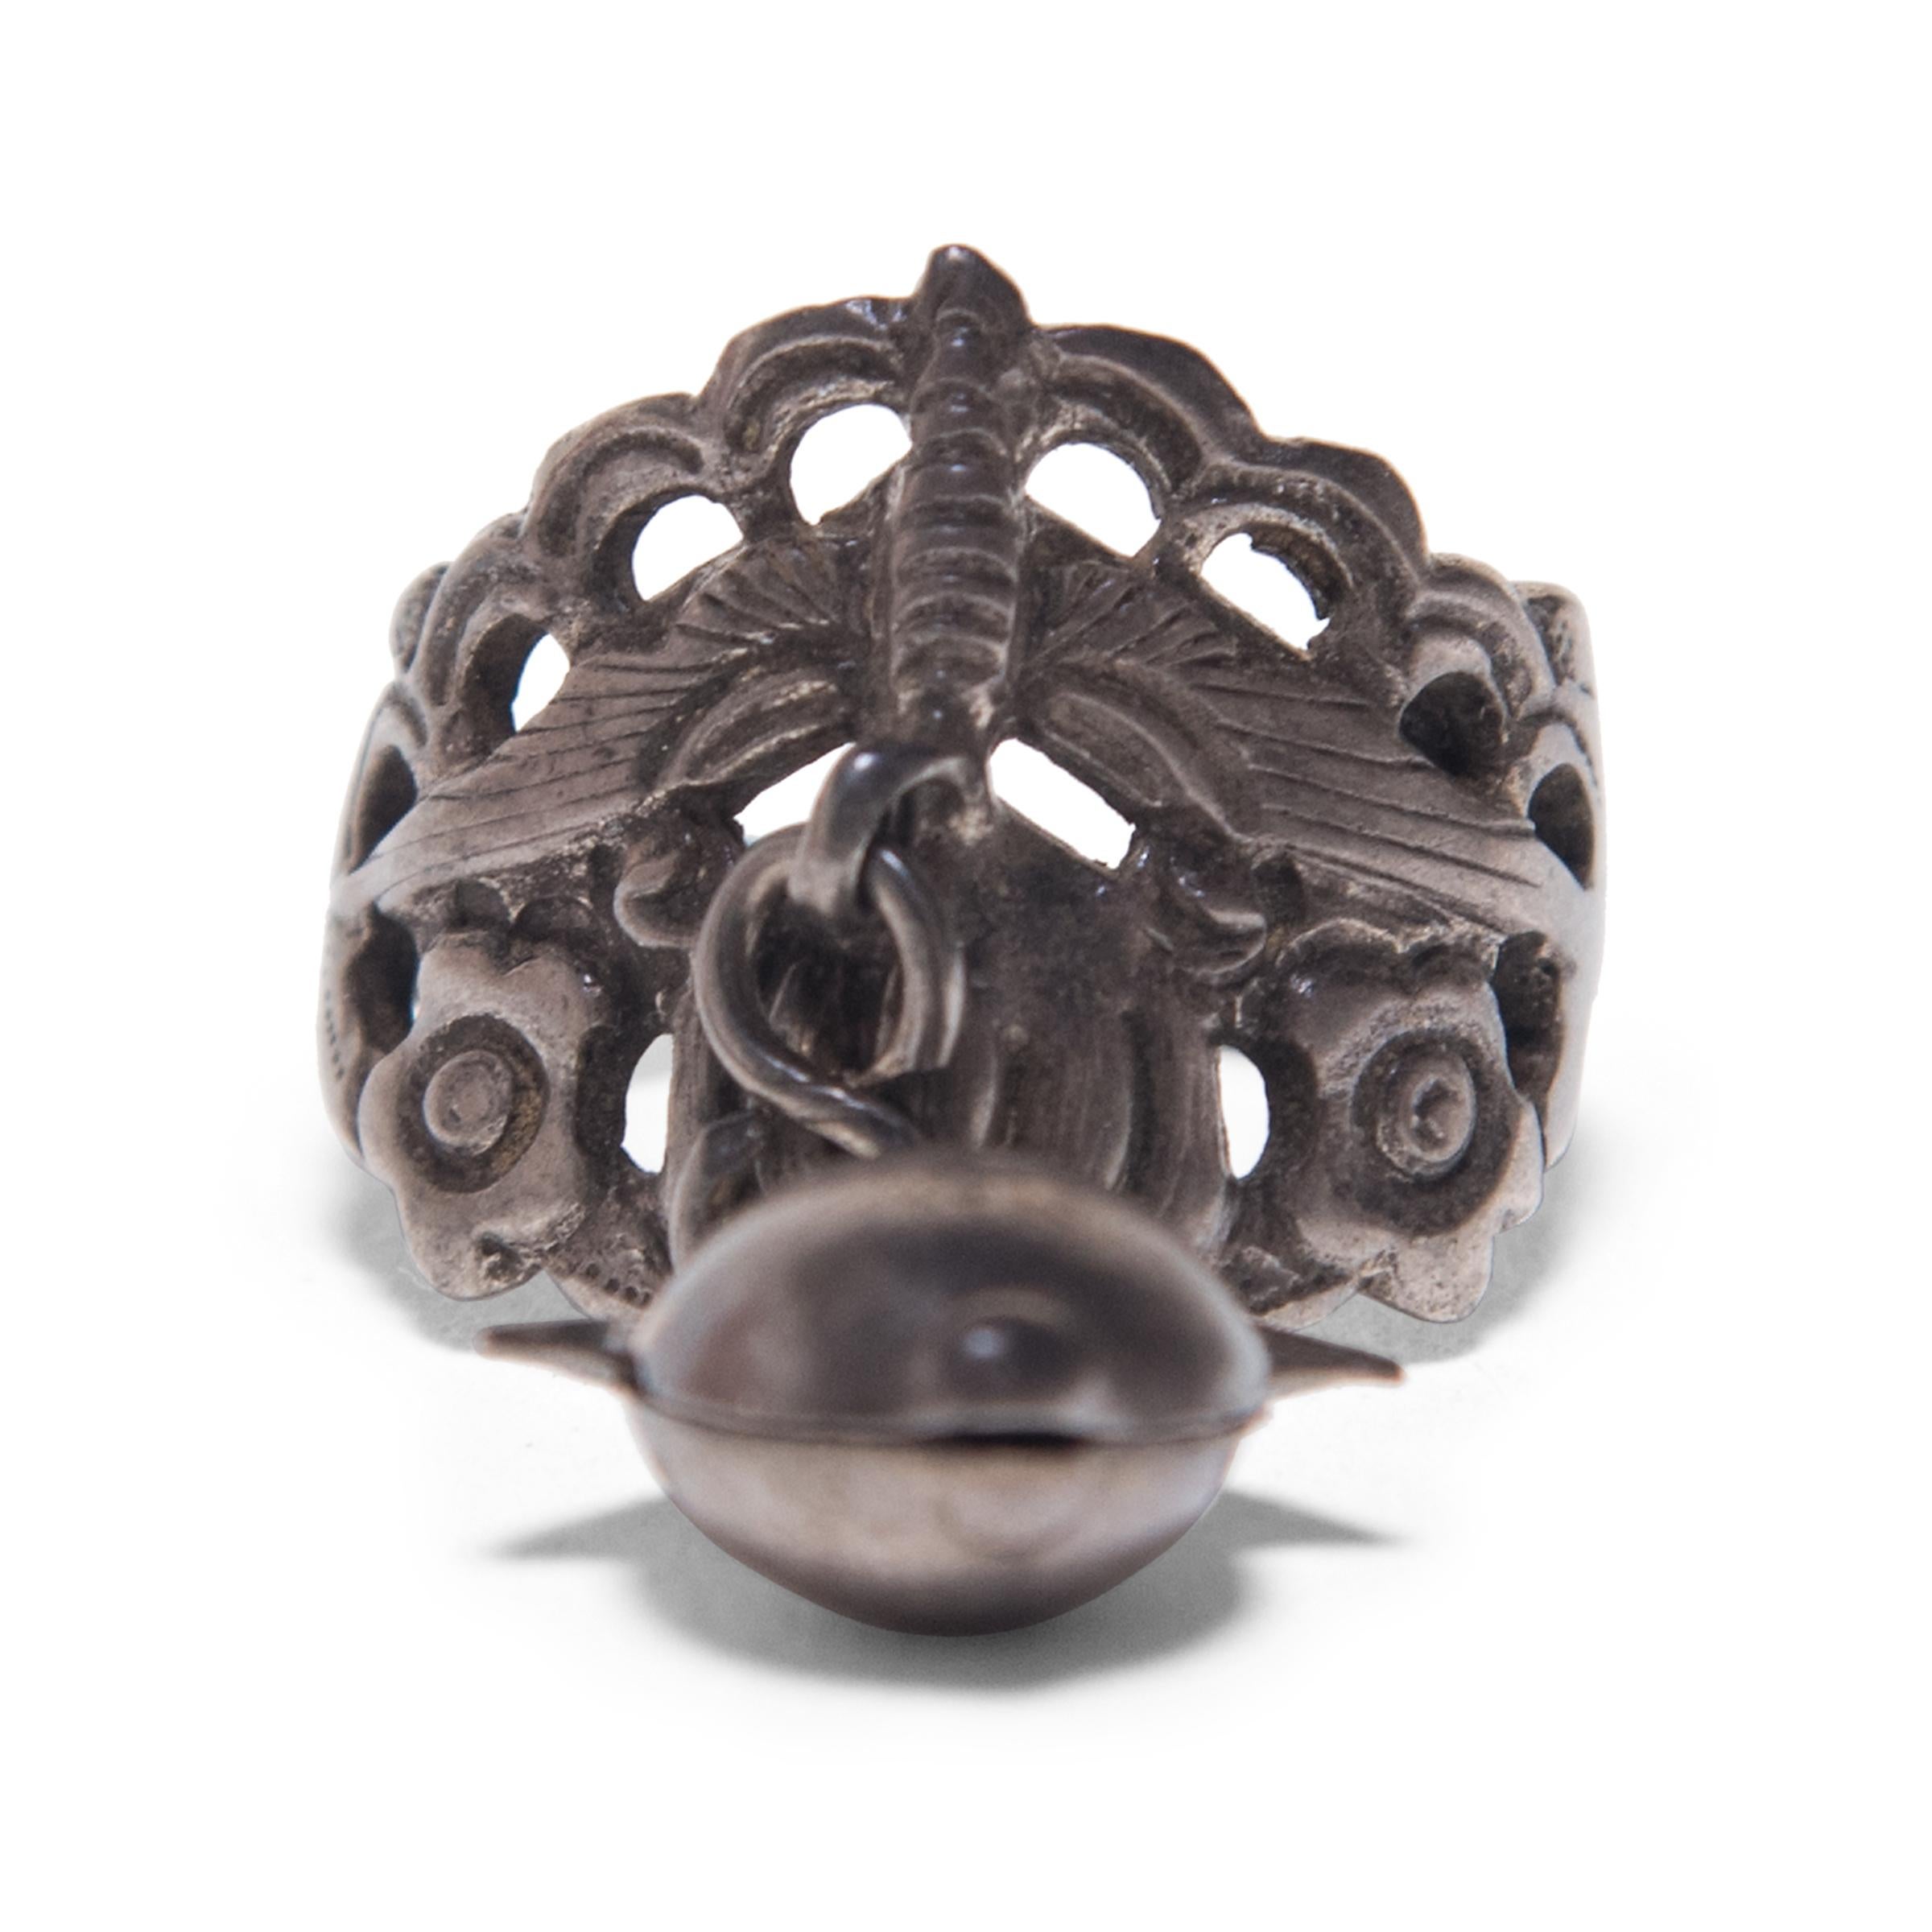 Dated to the late 19th century, this silver charm ring was believed to protect the wearer from bad luck and malevolent spirits. Intricately patterned and laden with symbolism, the ring imparts an everyday blessing. A round, ribbed gourd on one side